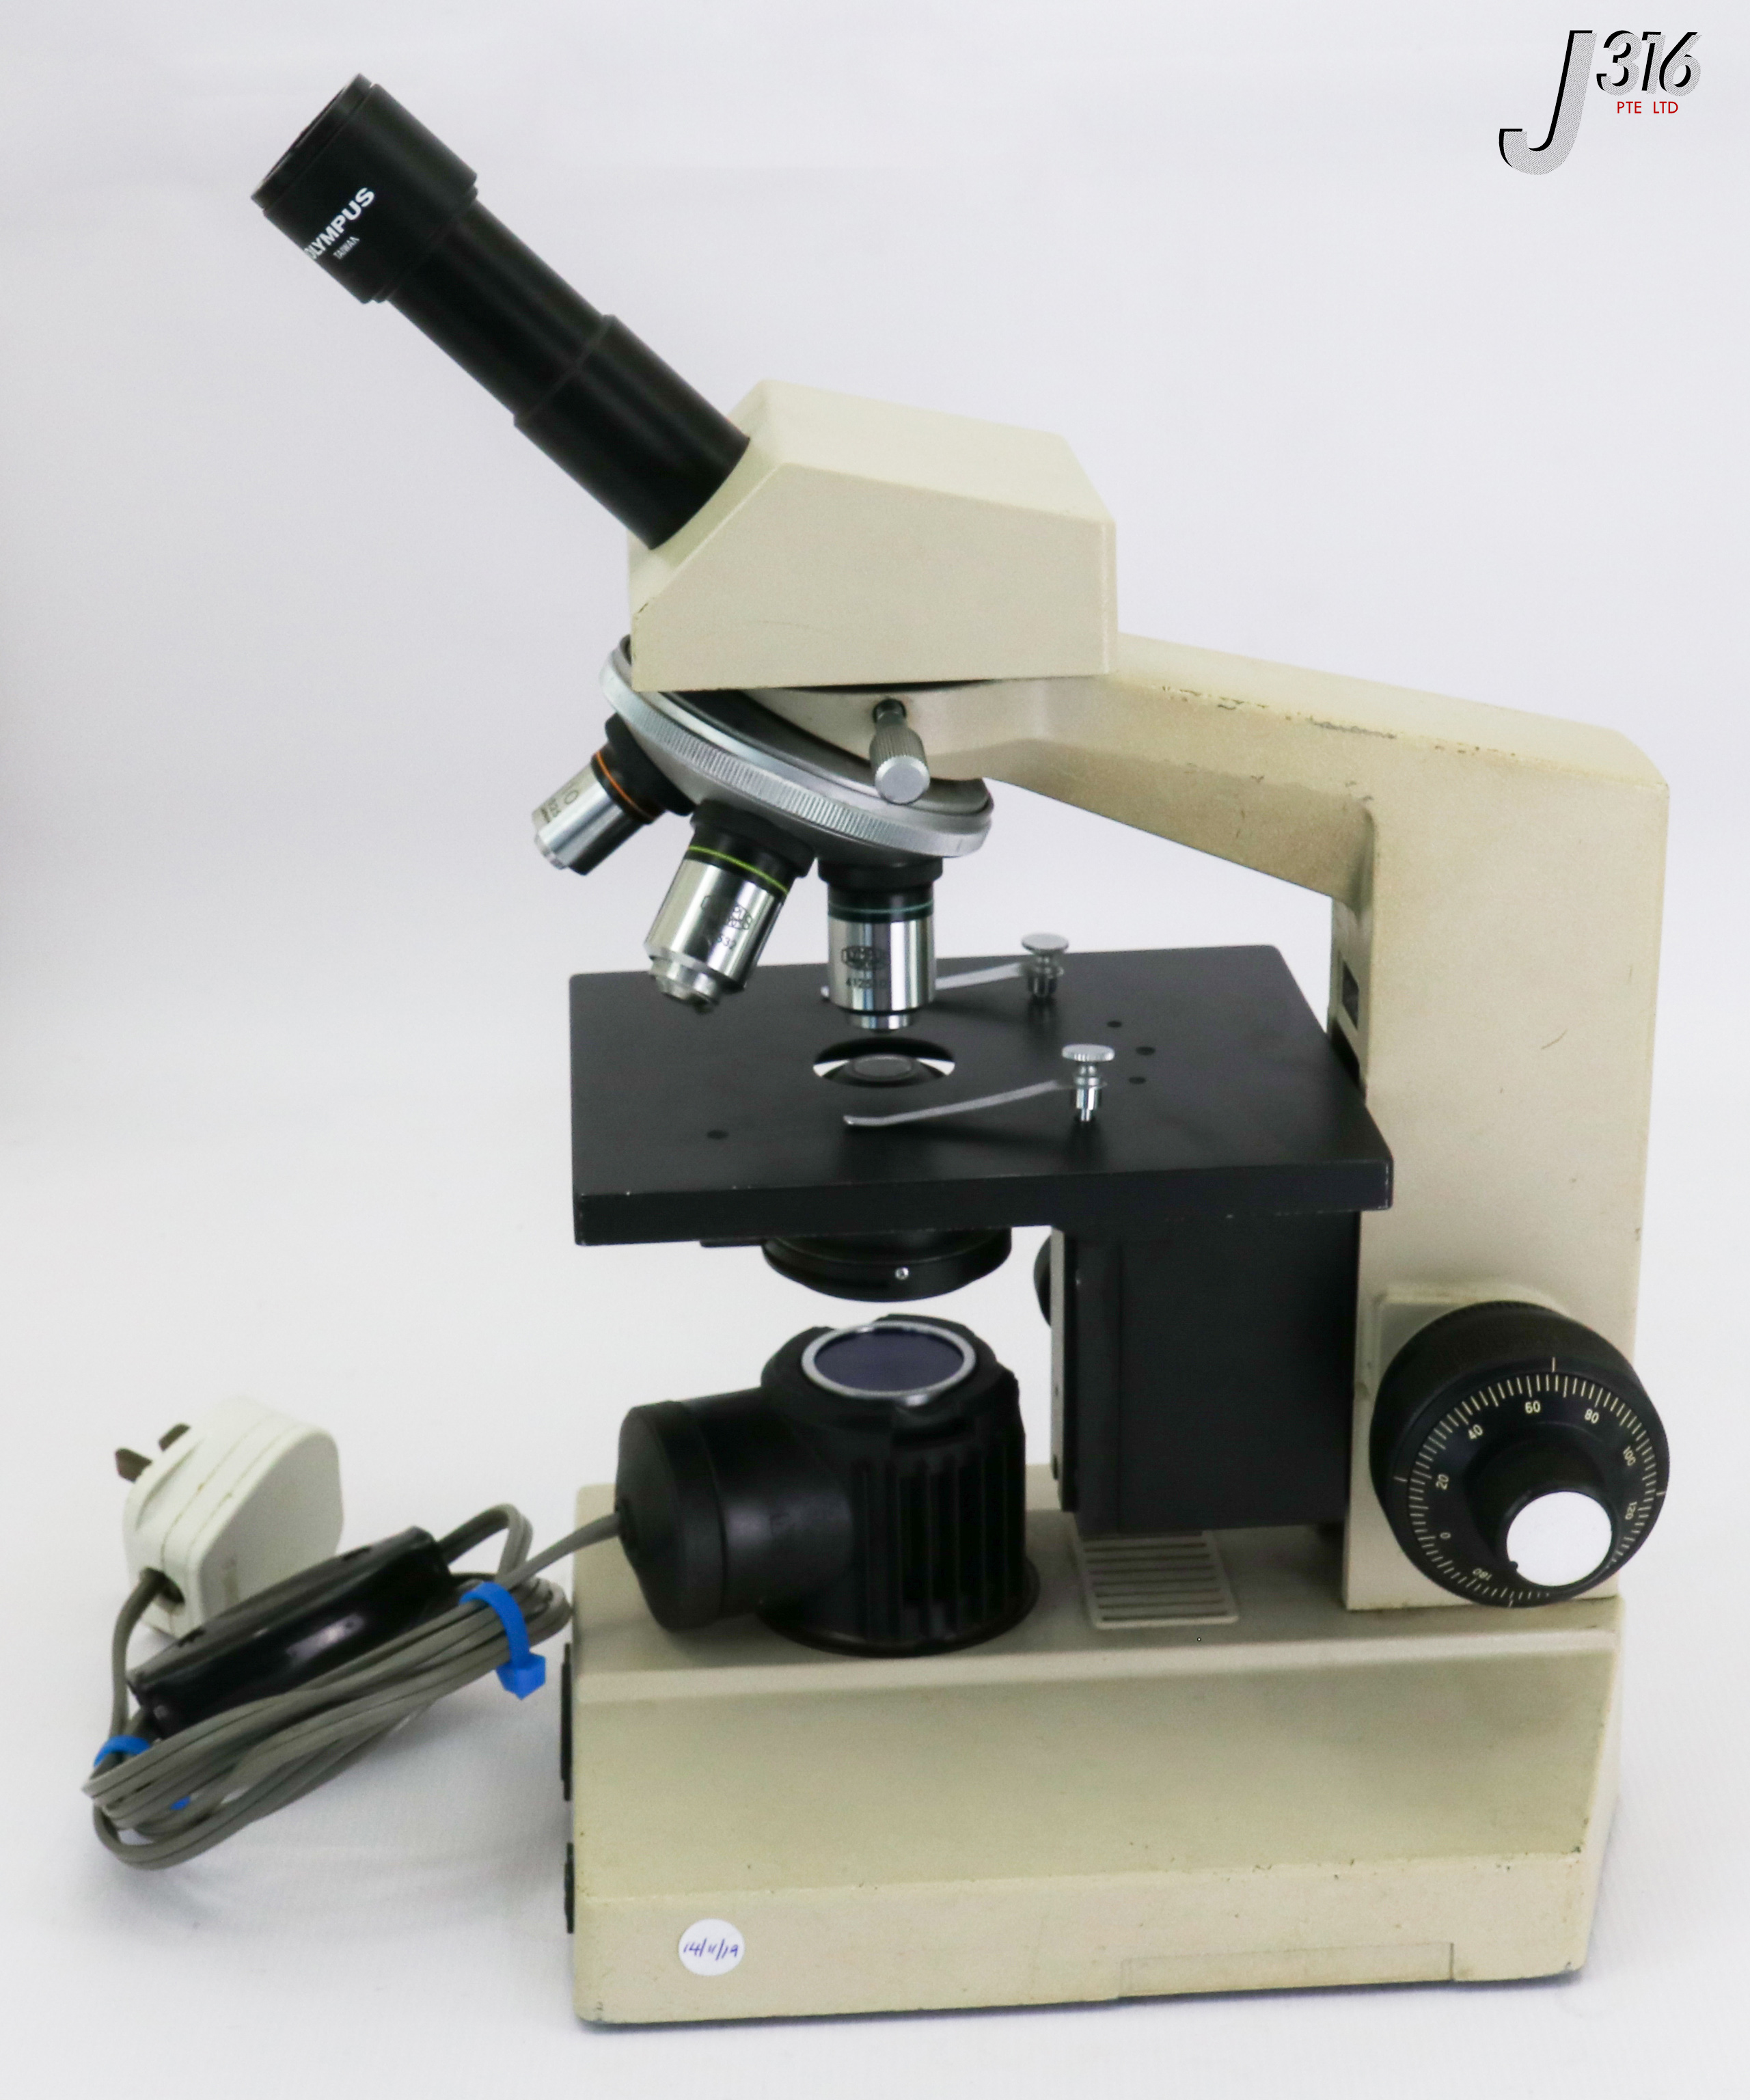 859 OLYMPUS SYSTEM MICROSCOPE W/ LIGHT SOURCE (PARTS) SERIES CHC ...